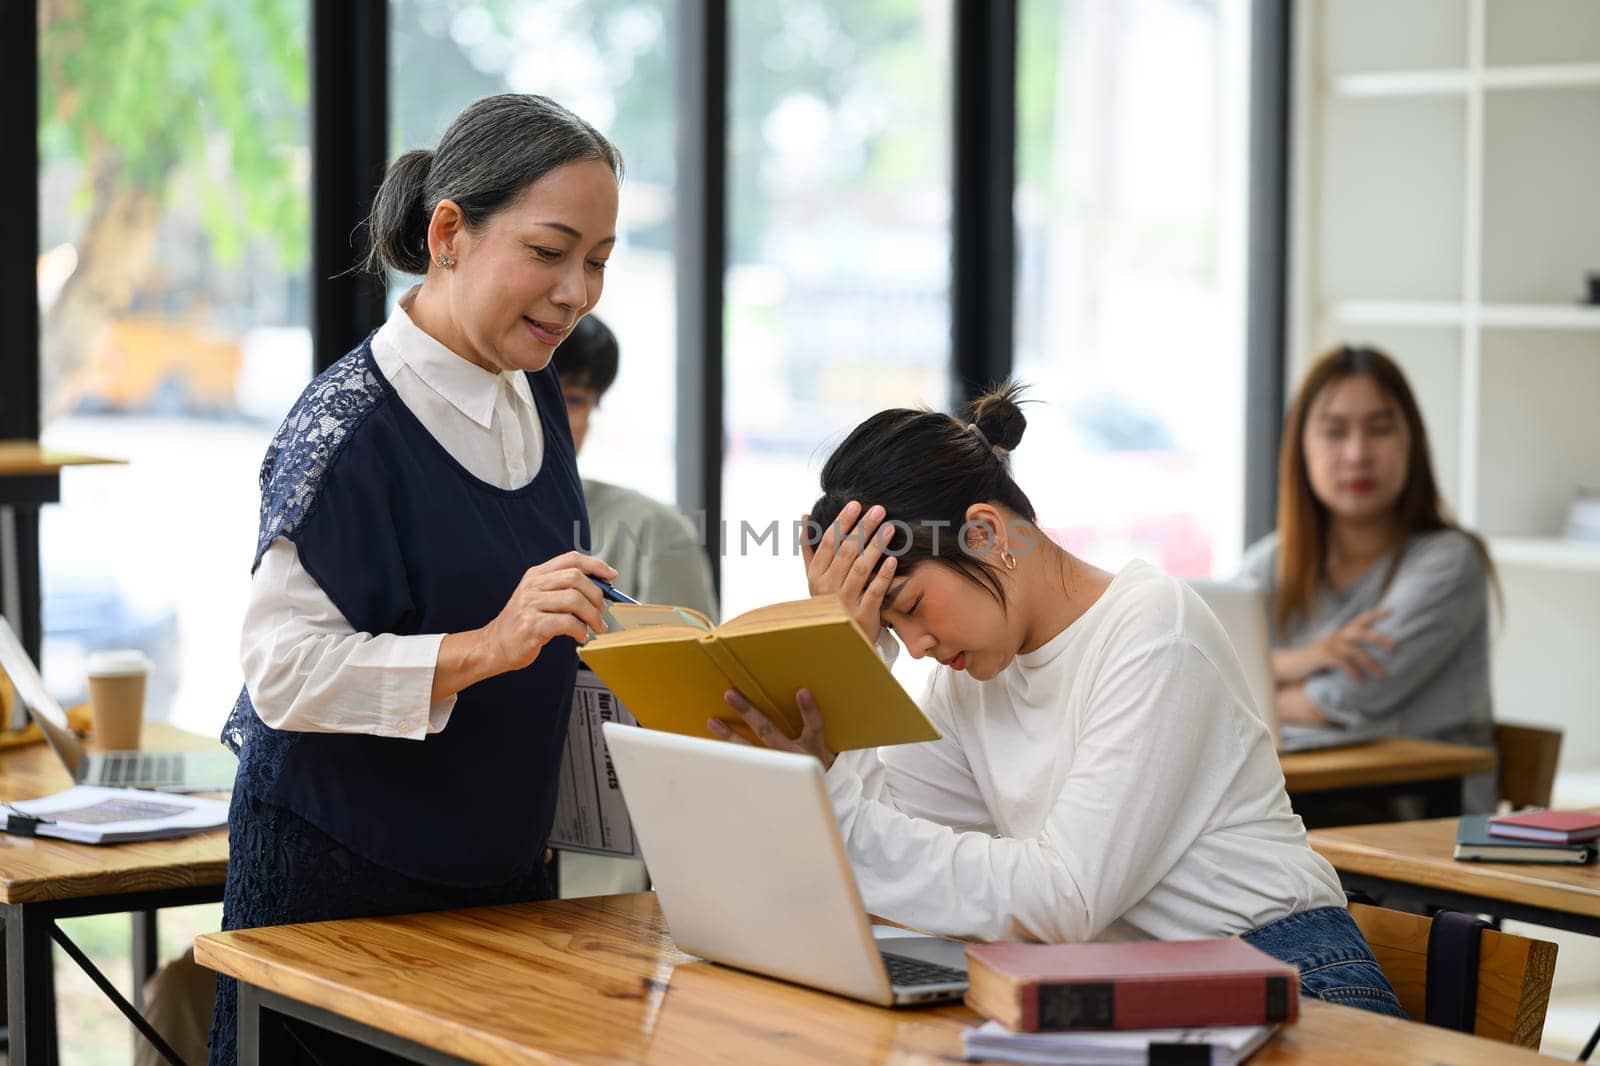 Middle age teacher assisting a struggling student with assignment in a classroom.